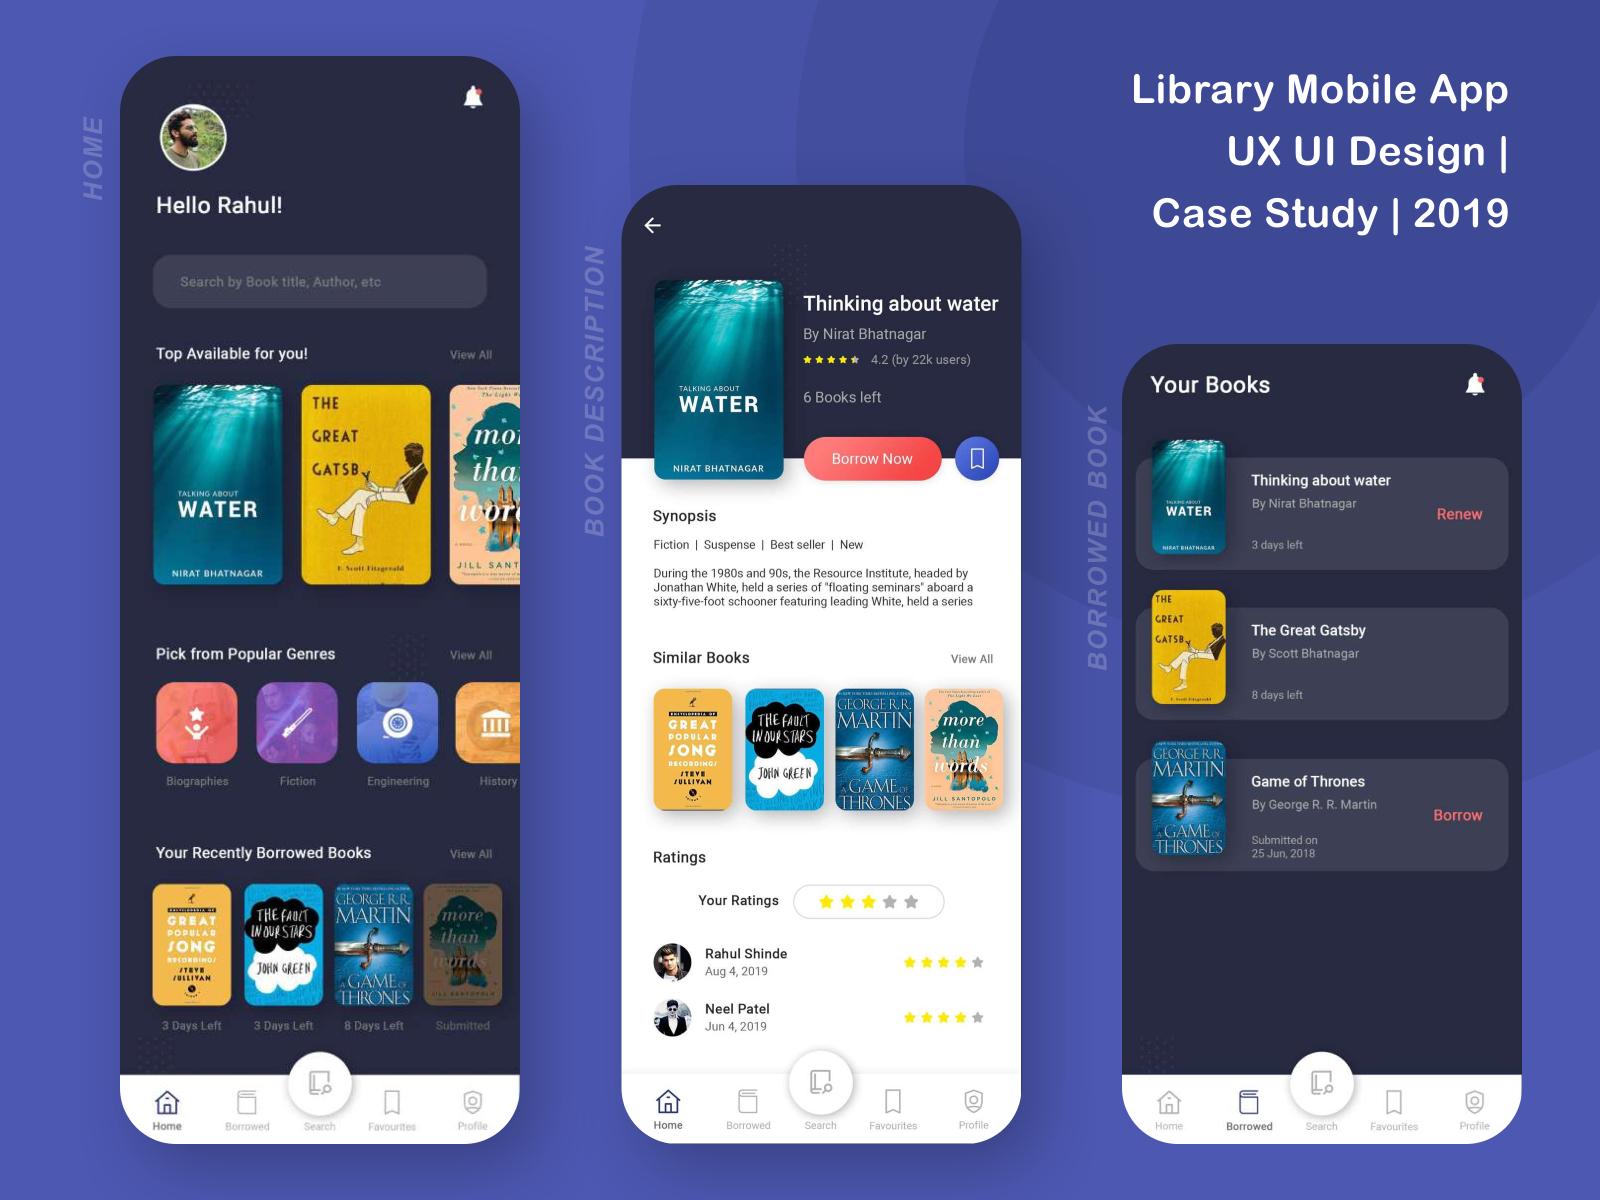 Library Mobile App | UX UI Design Case Study by Rahul Shinde🖌 on Dribbble